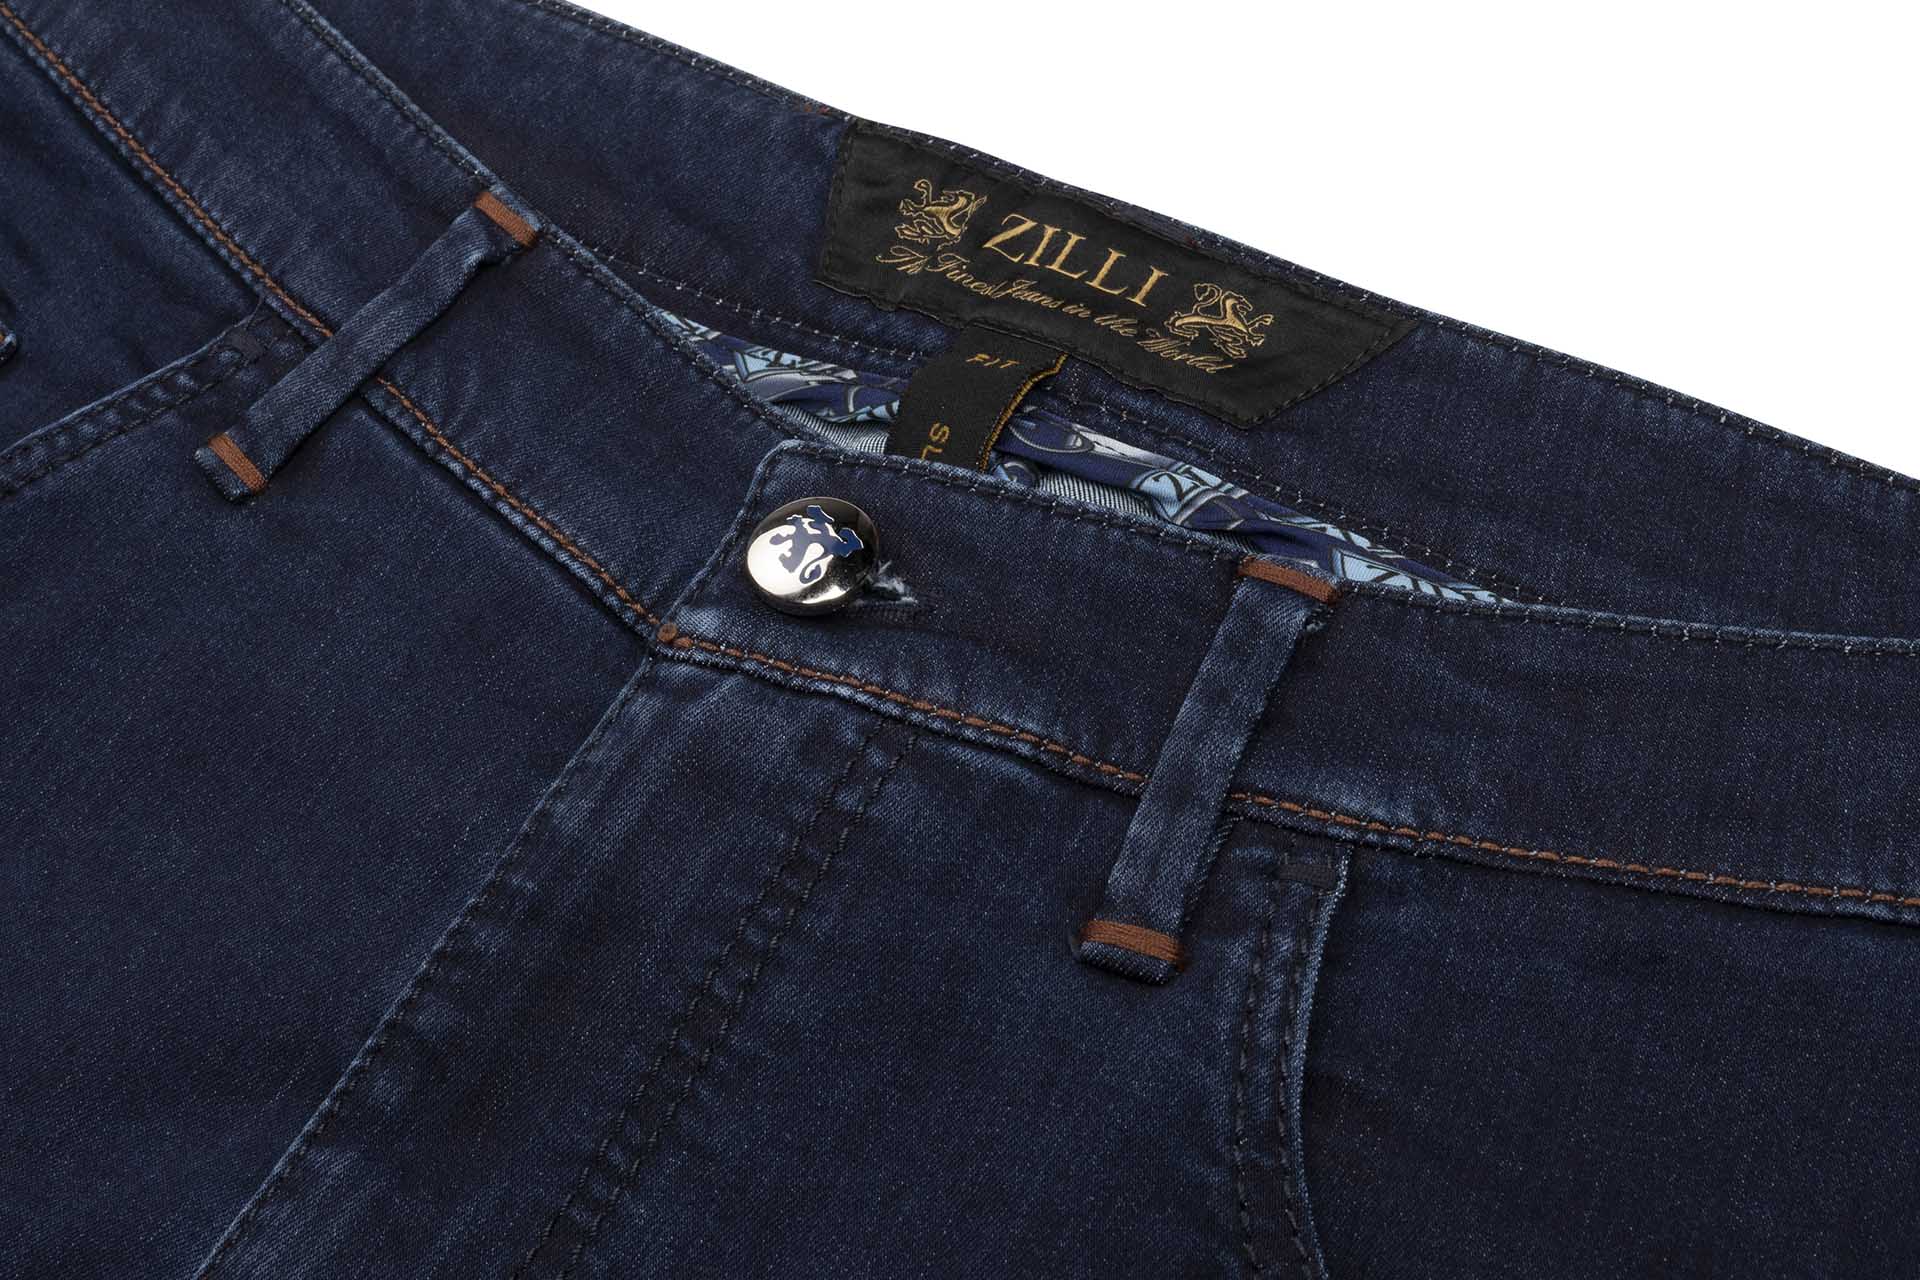 Slim Fit Jeans, Lion Embroidery - ZILLI